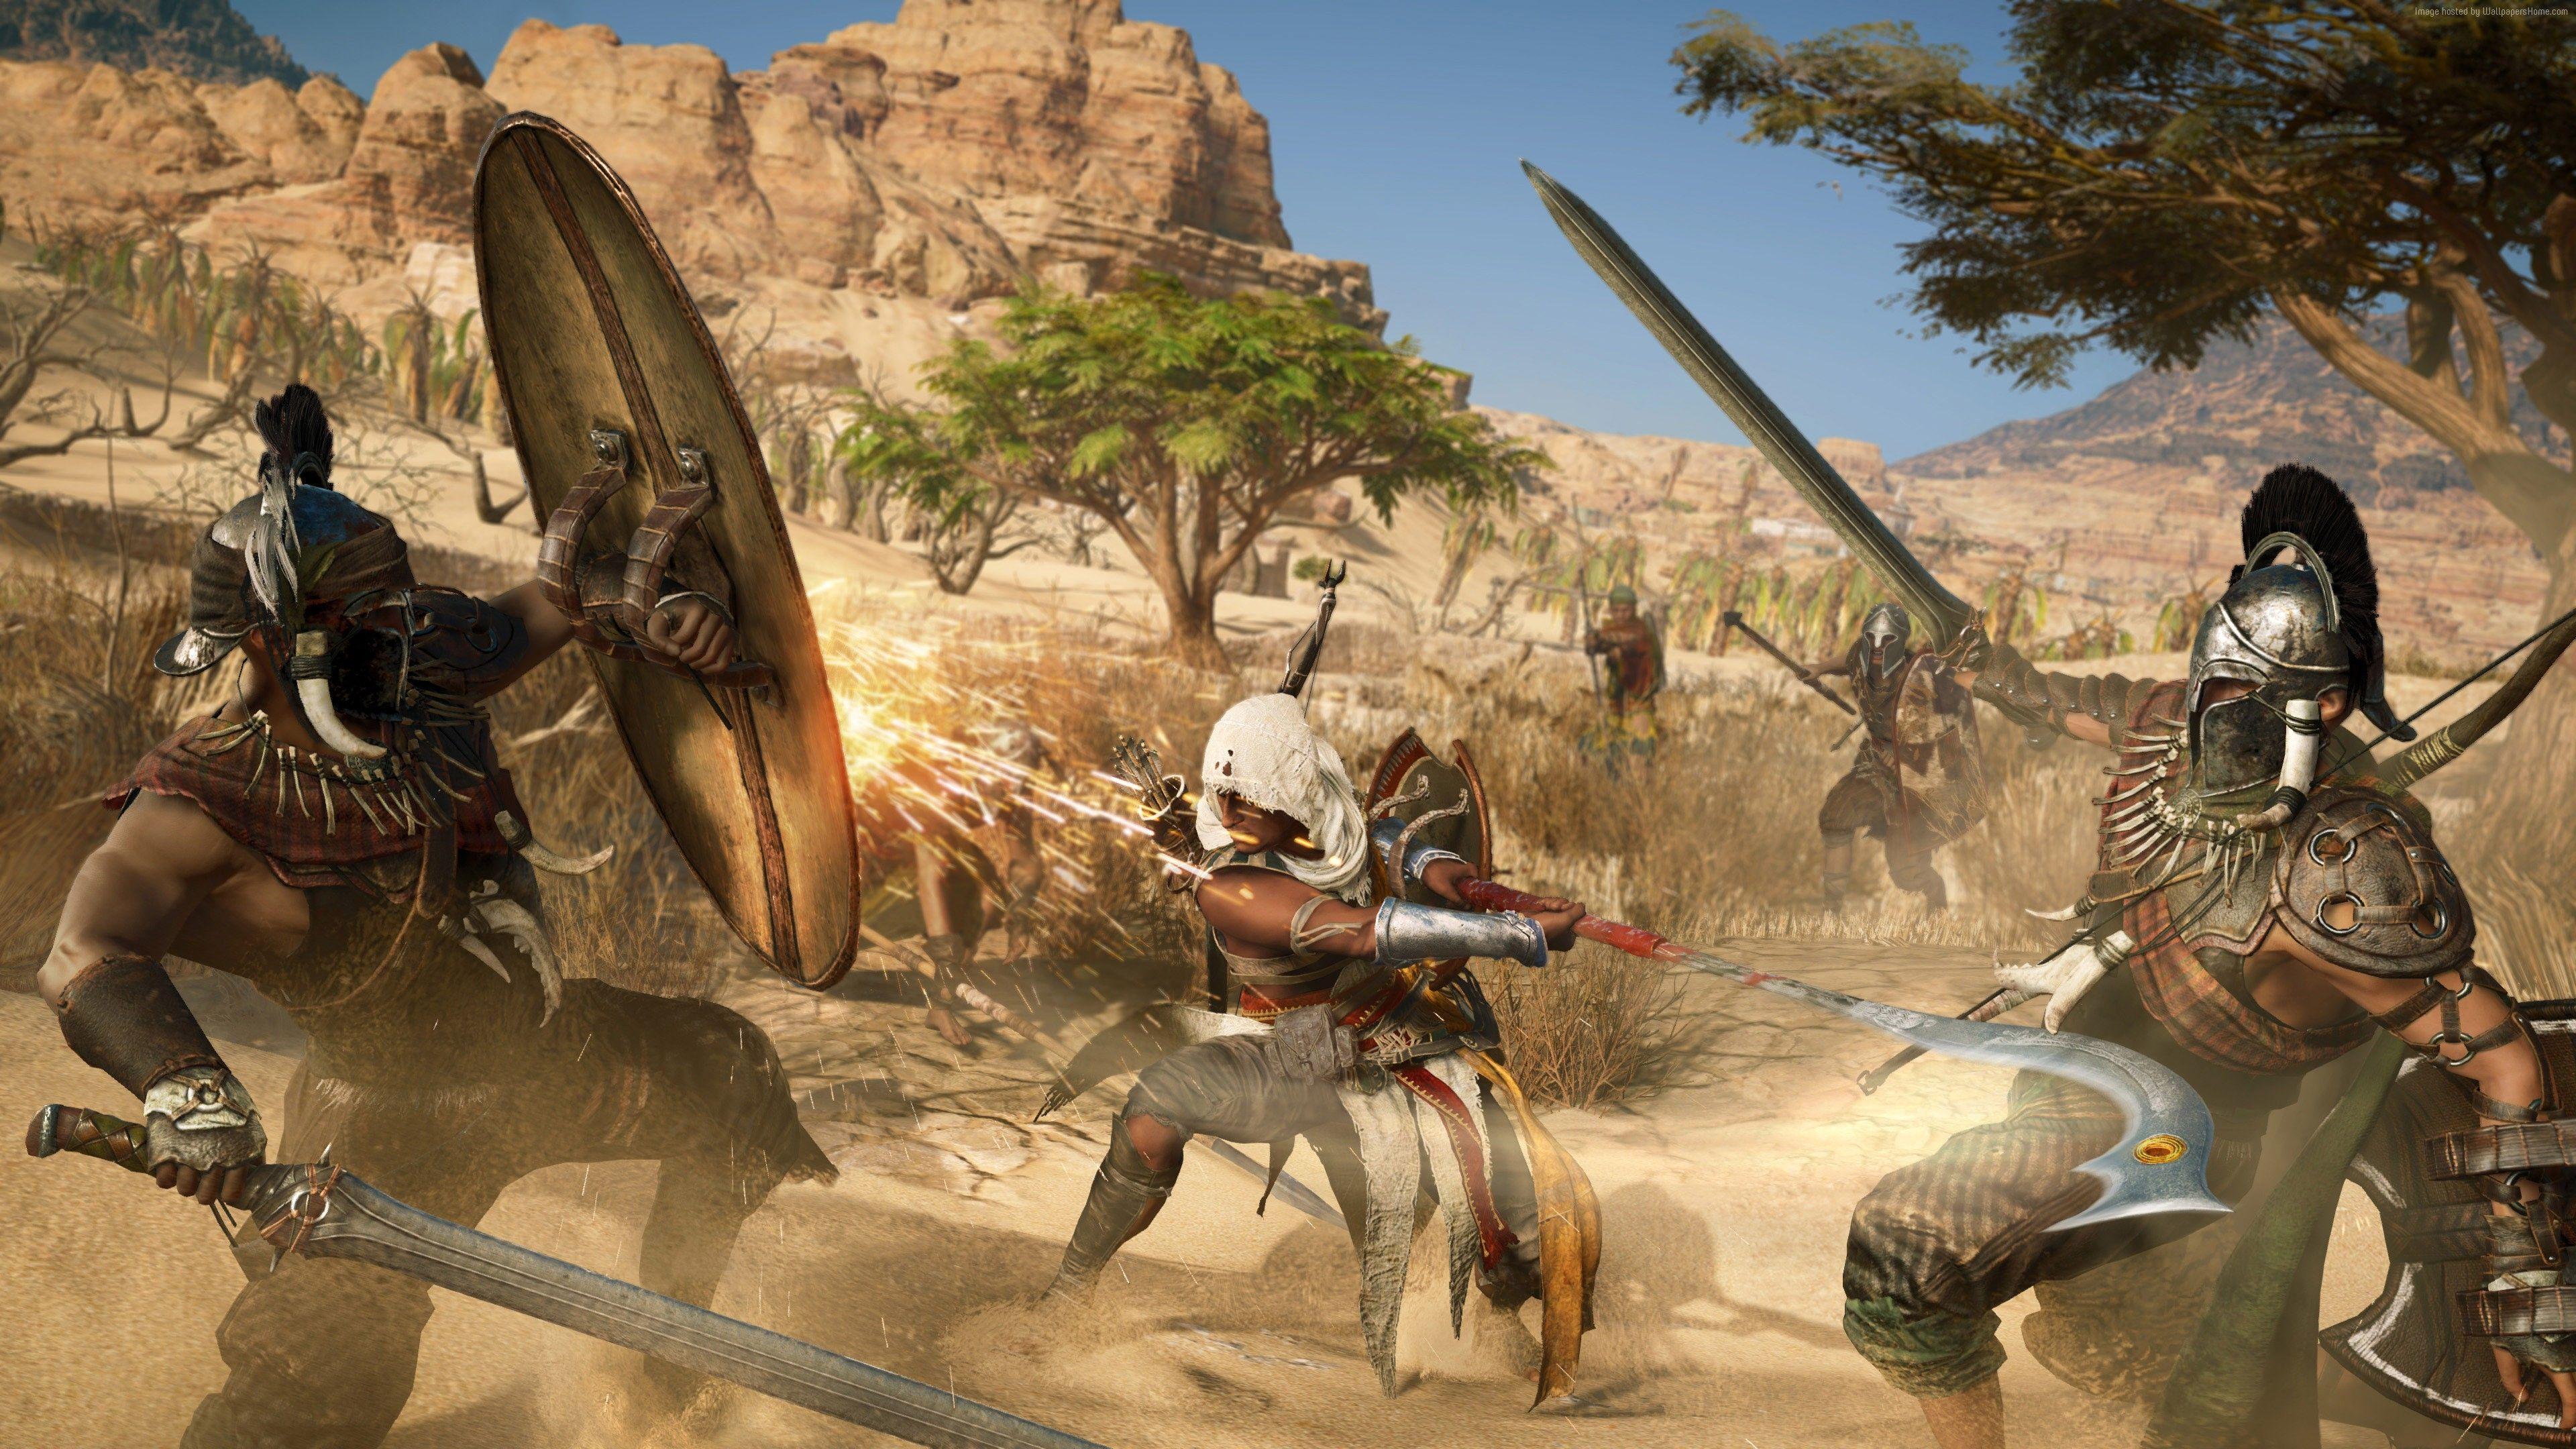 Download wallpapers Assassins Creed Origins, 2017, RPG, Ptolemy XIII Theos  Philopator, PlayStation 4, Xbox One for desktop free. Pictures for desktop  free